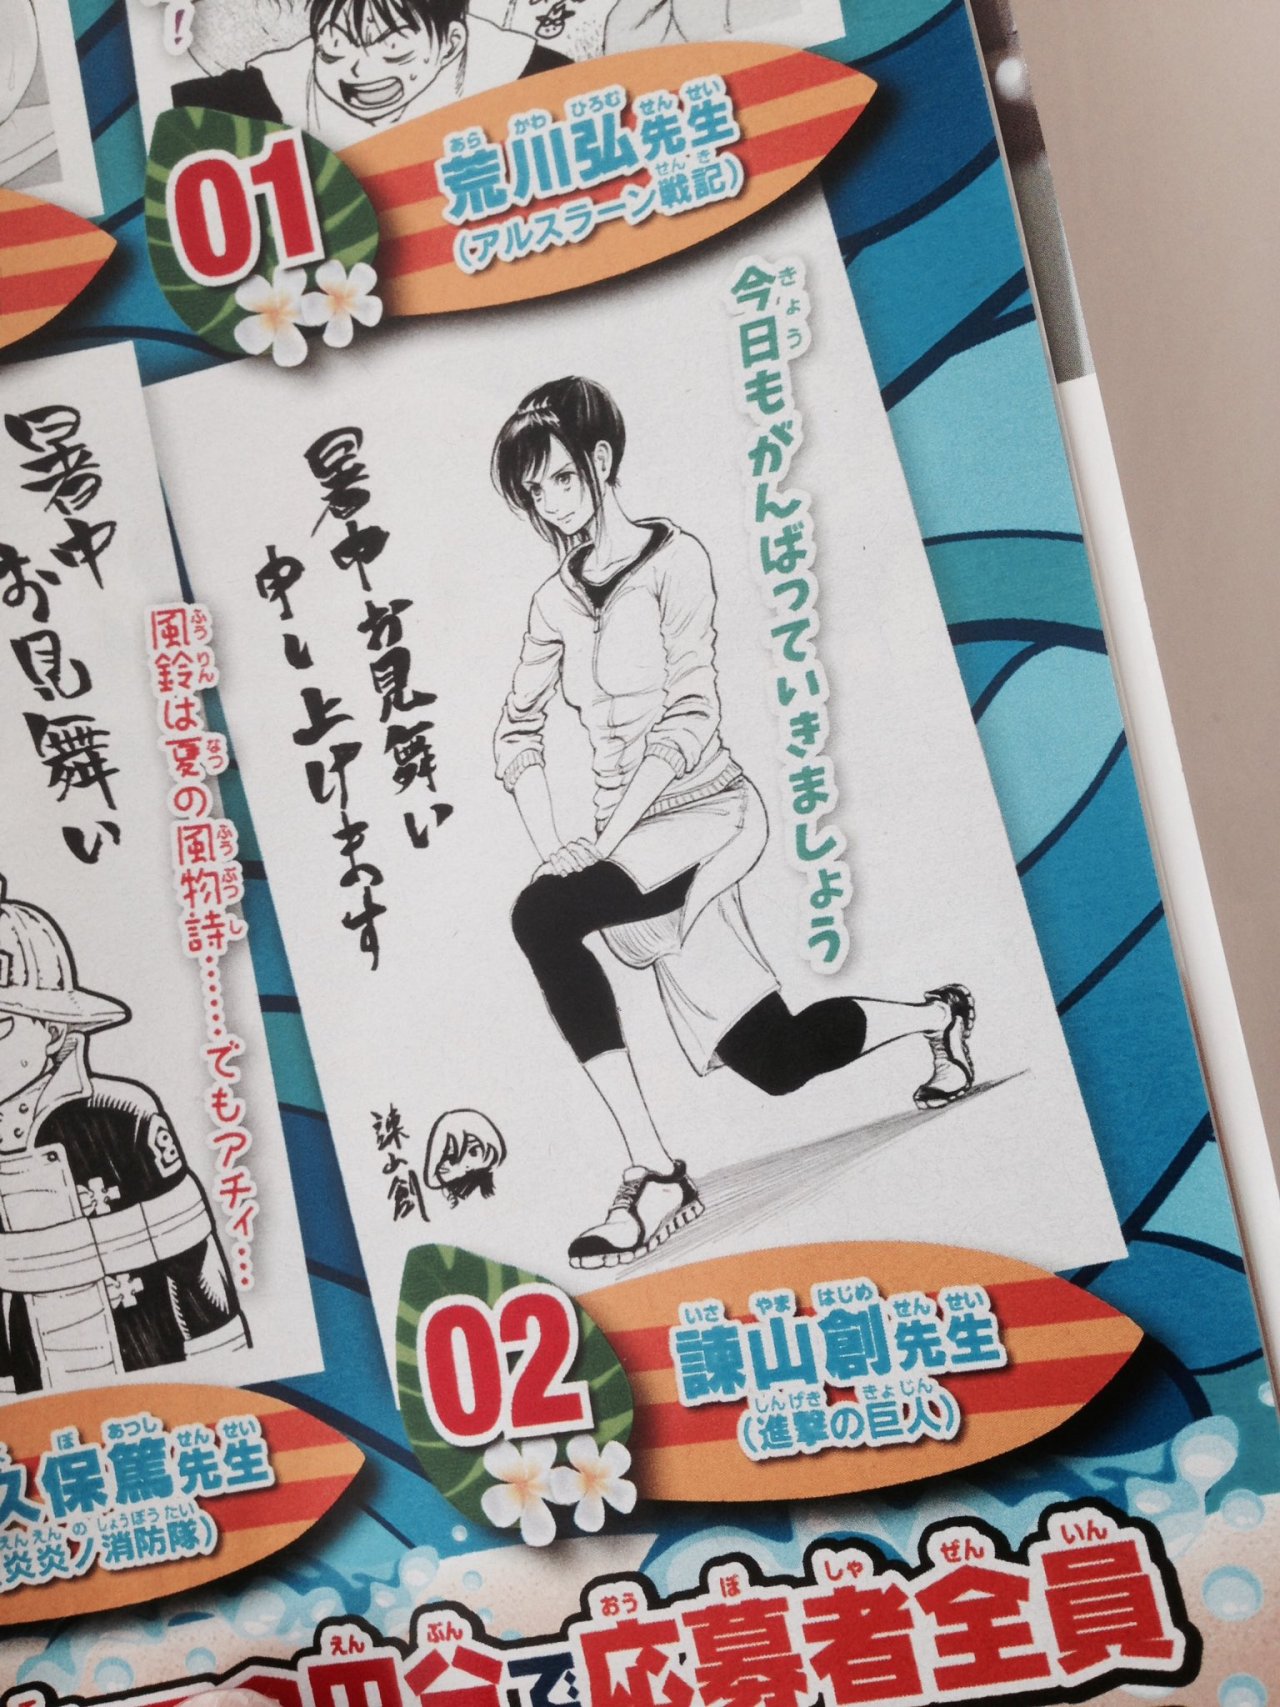 Isayama Hajime’s Summer Greeting Card for 2016, featuring Sasha, is previewed in